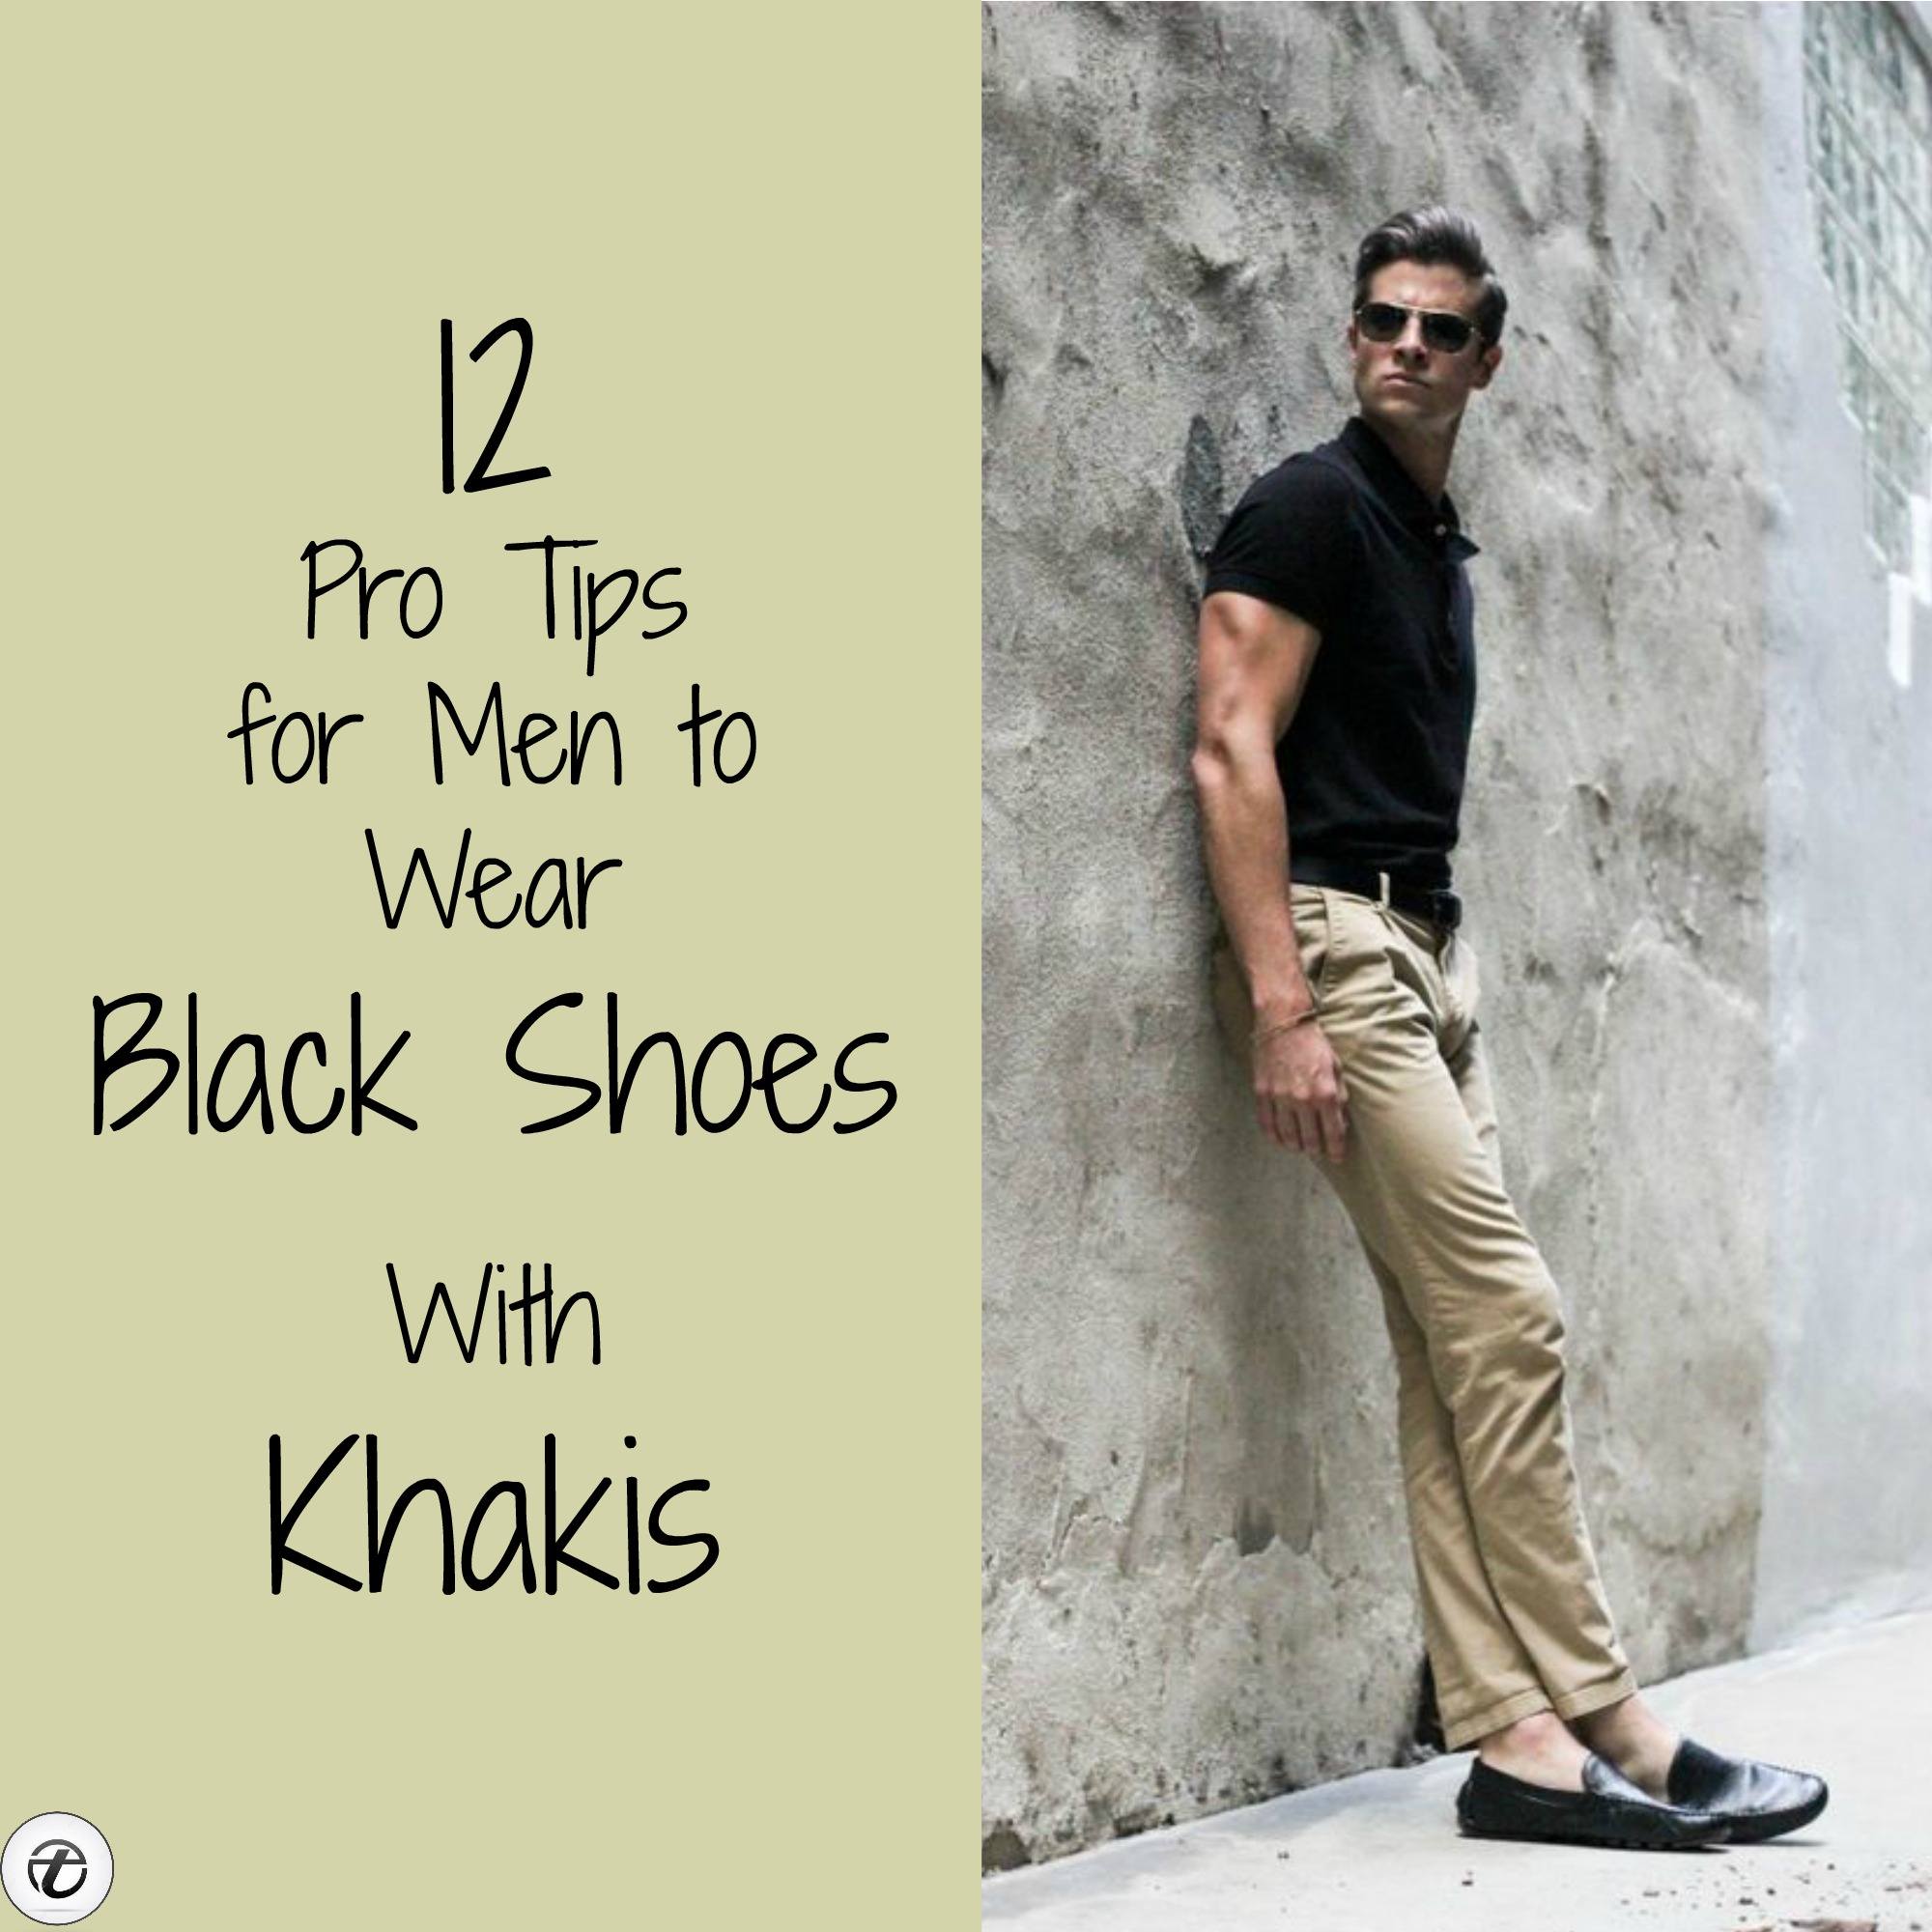 How To Wear Black Shoes With Khaki Pants – 16 Pro Ideas For Men